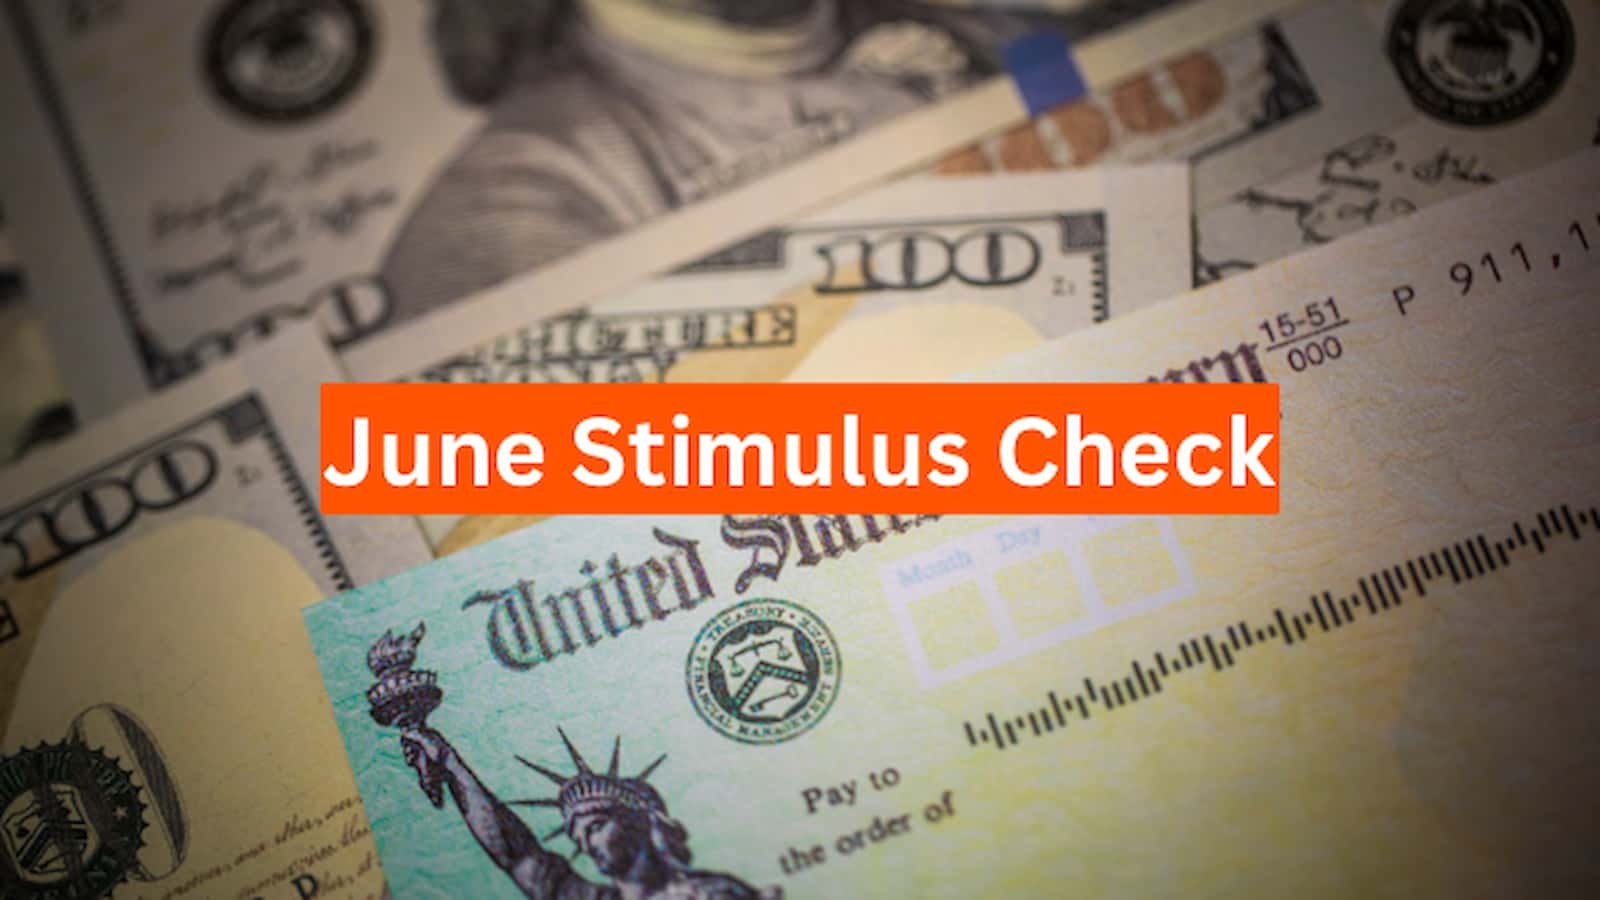 Which State is About to Provide Additional Stimulus Payment at the End of June